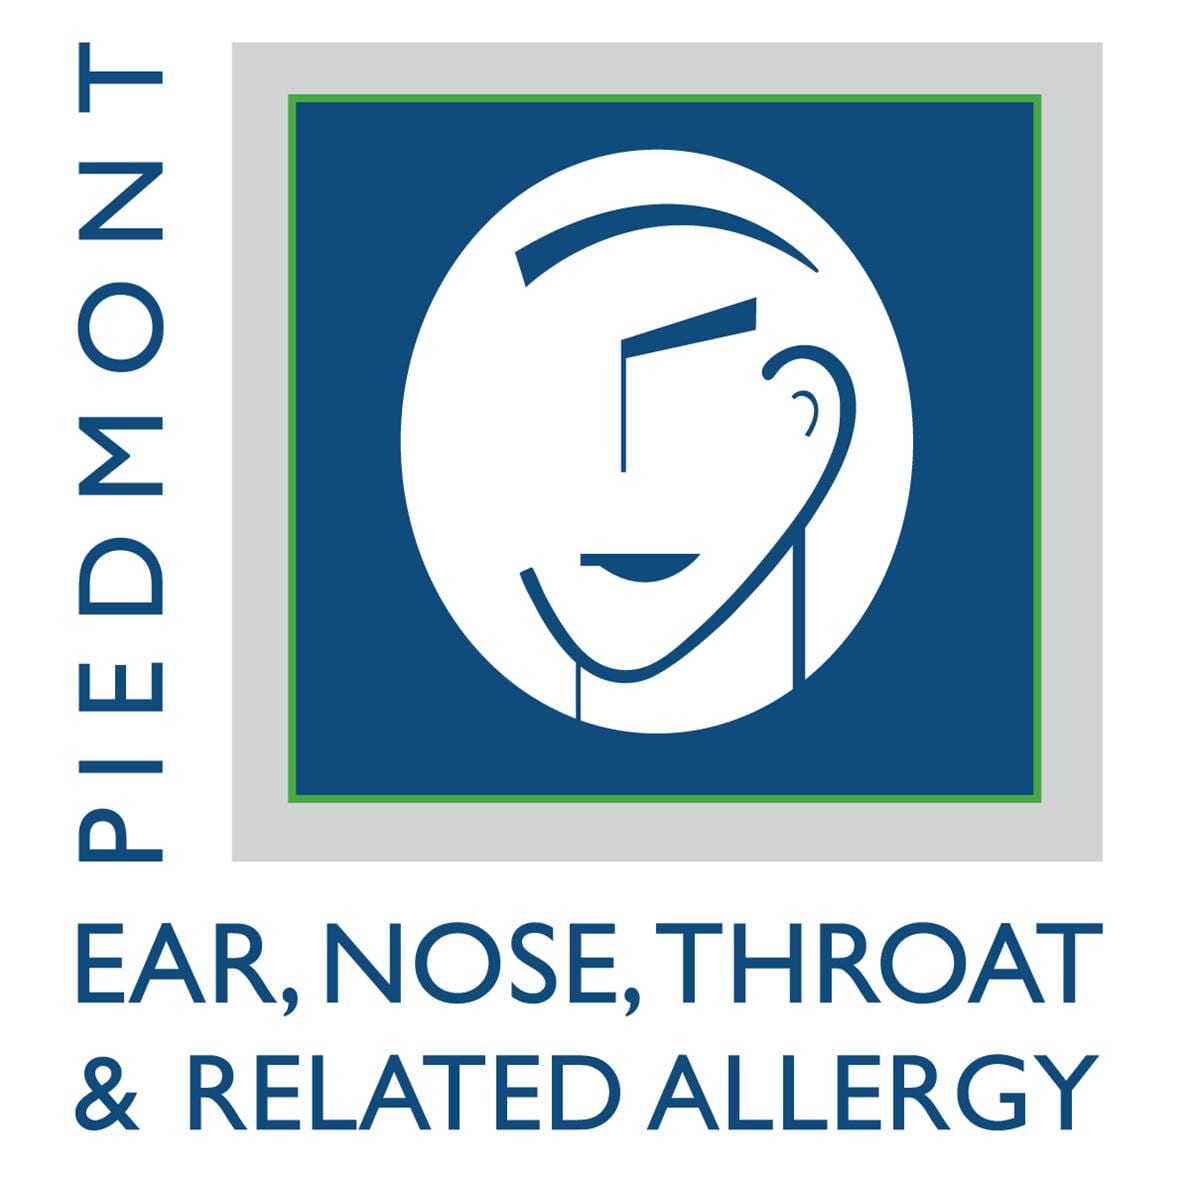 Piedmont Ear, Nose, Throat & Related Allergy Photo